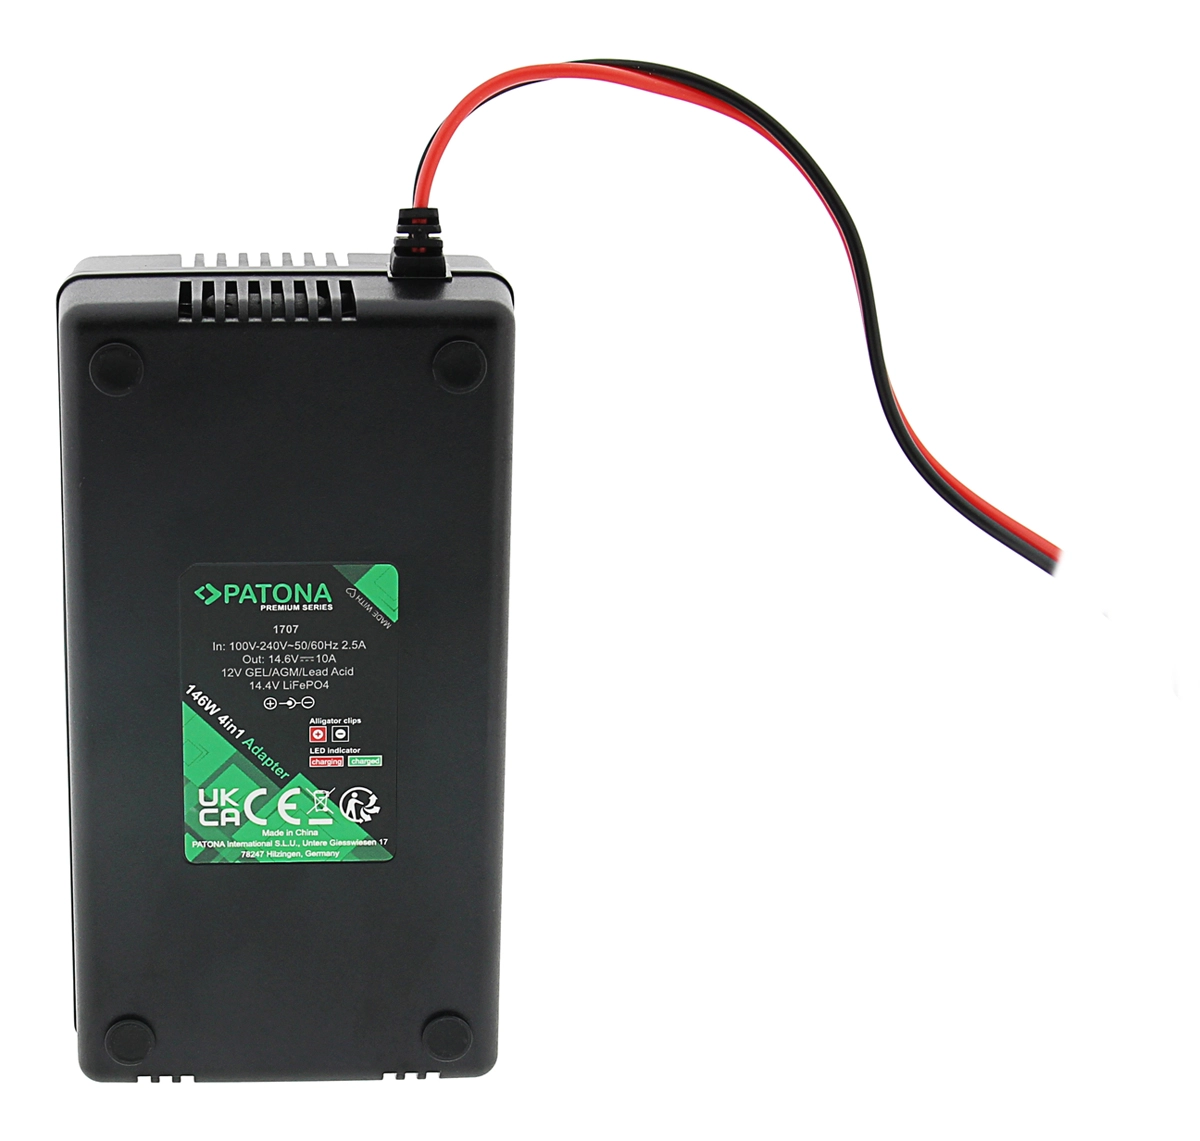 PATONA Premium 4in1 charger for gel, AGM, lead acid and LiFePO4 batteries